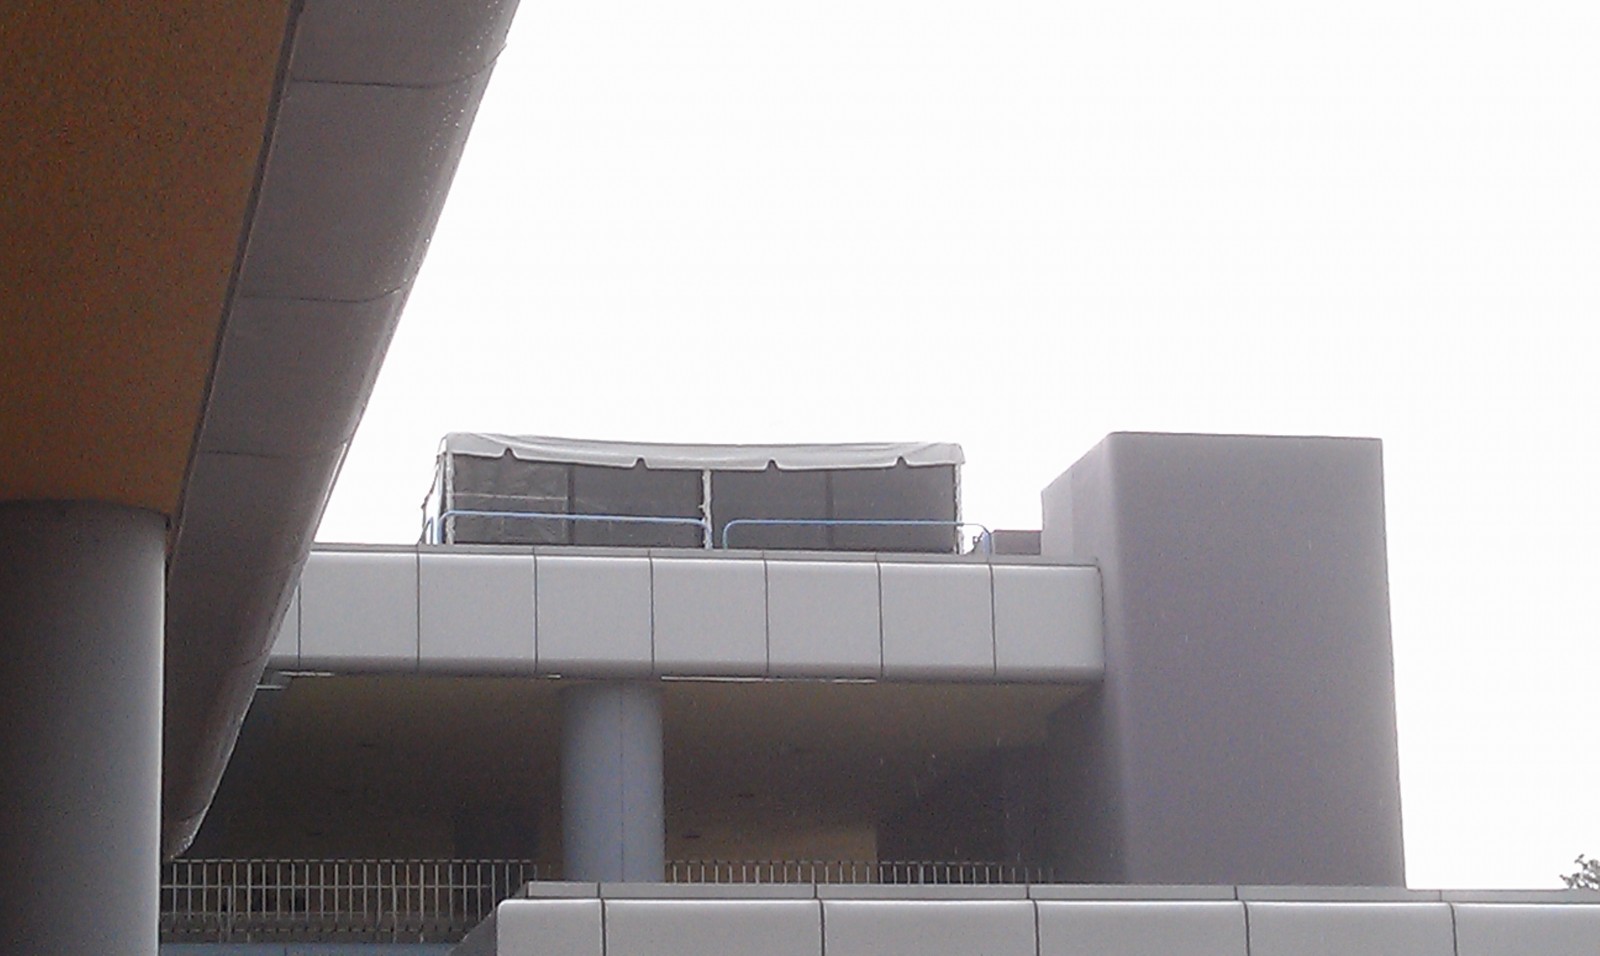 Anyone know what the tent housing projectors atop the Epcot Monorail station is for